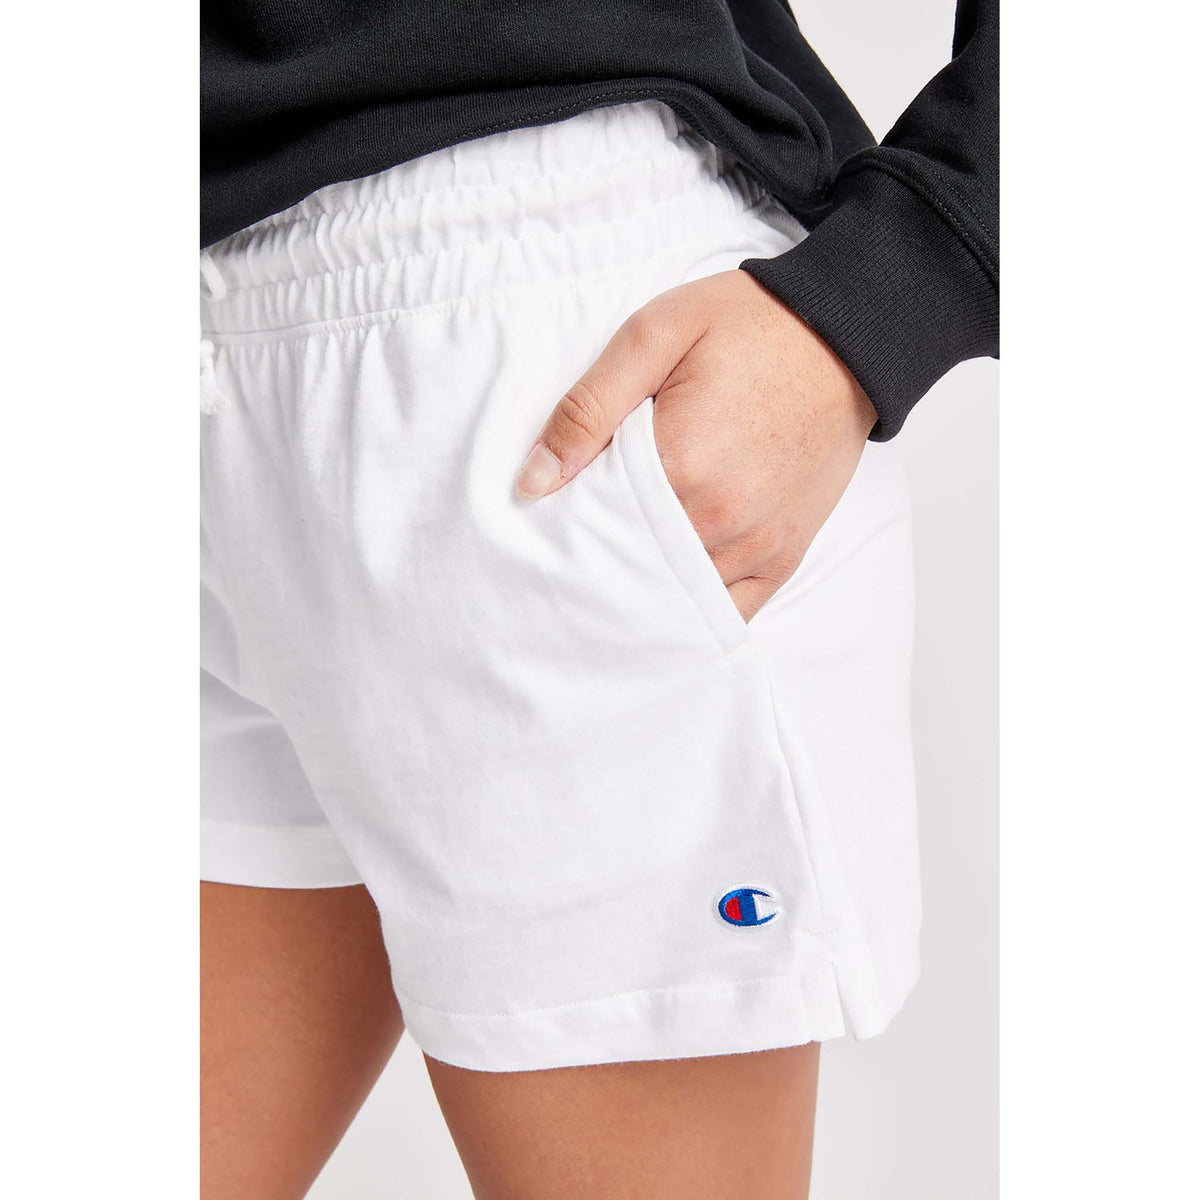 Champion Middleweight 3-inch short de sport pour femme blanc lateral